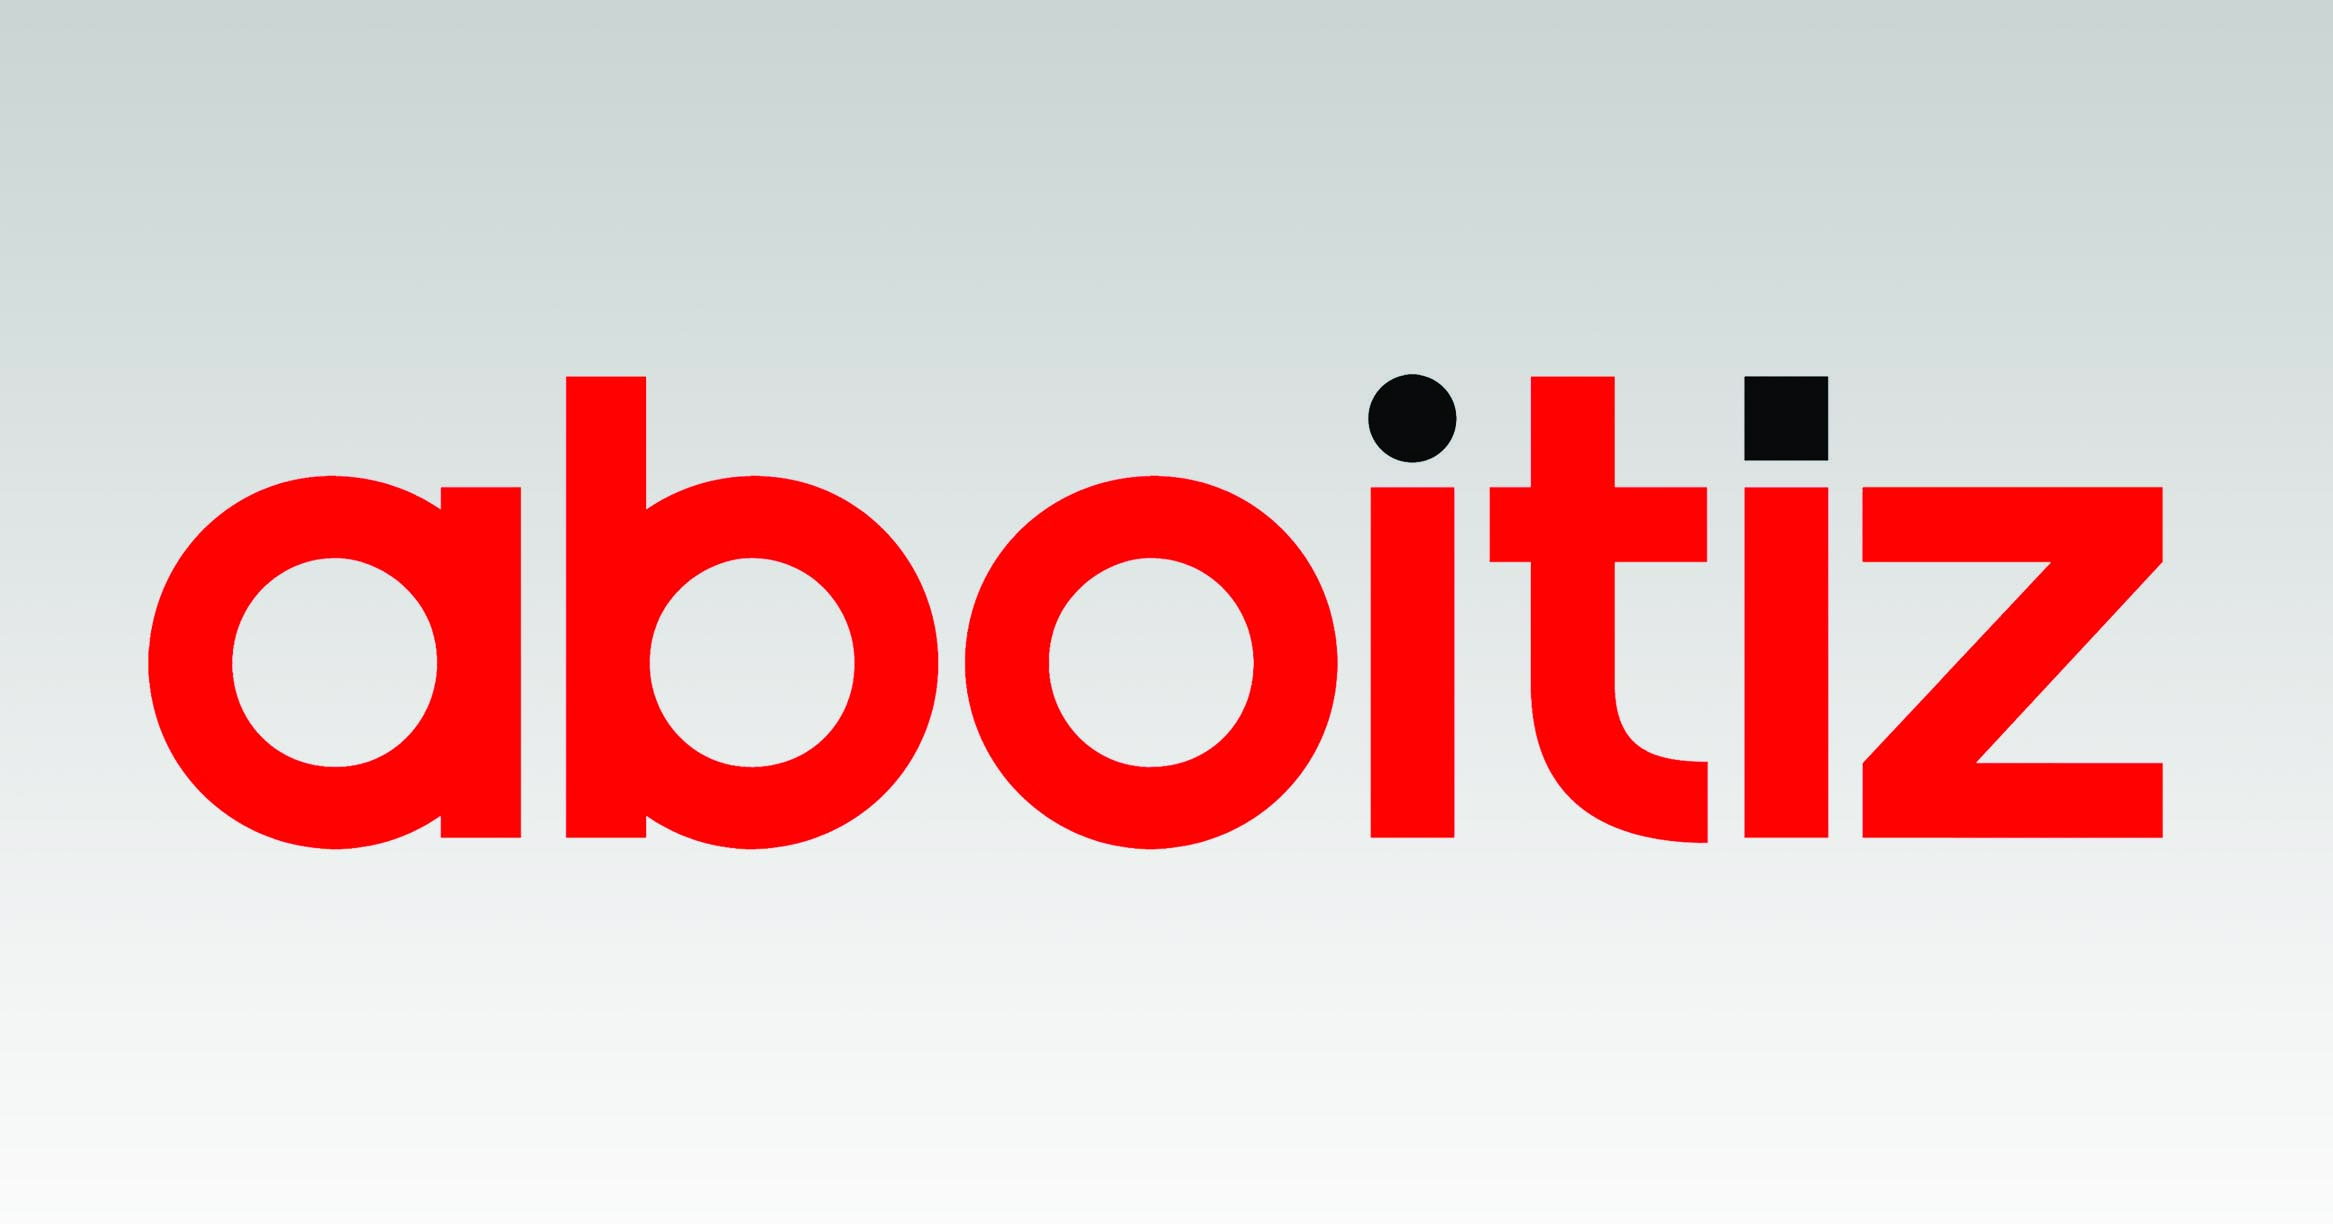 HOLDING STATEMENT from Aboitiz Group regarding the Acquisition of AirAsia as reported by Philippine Star